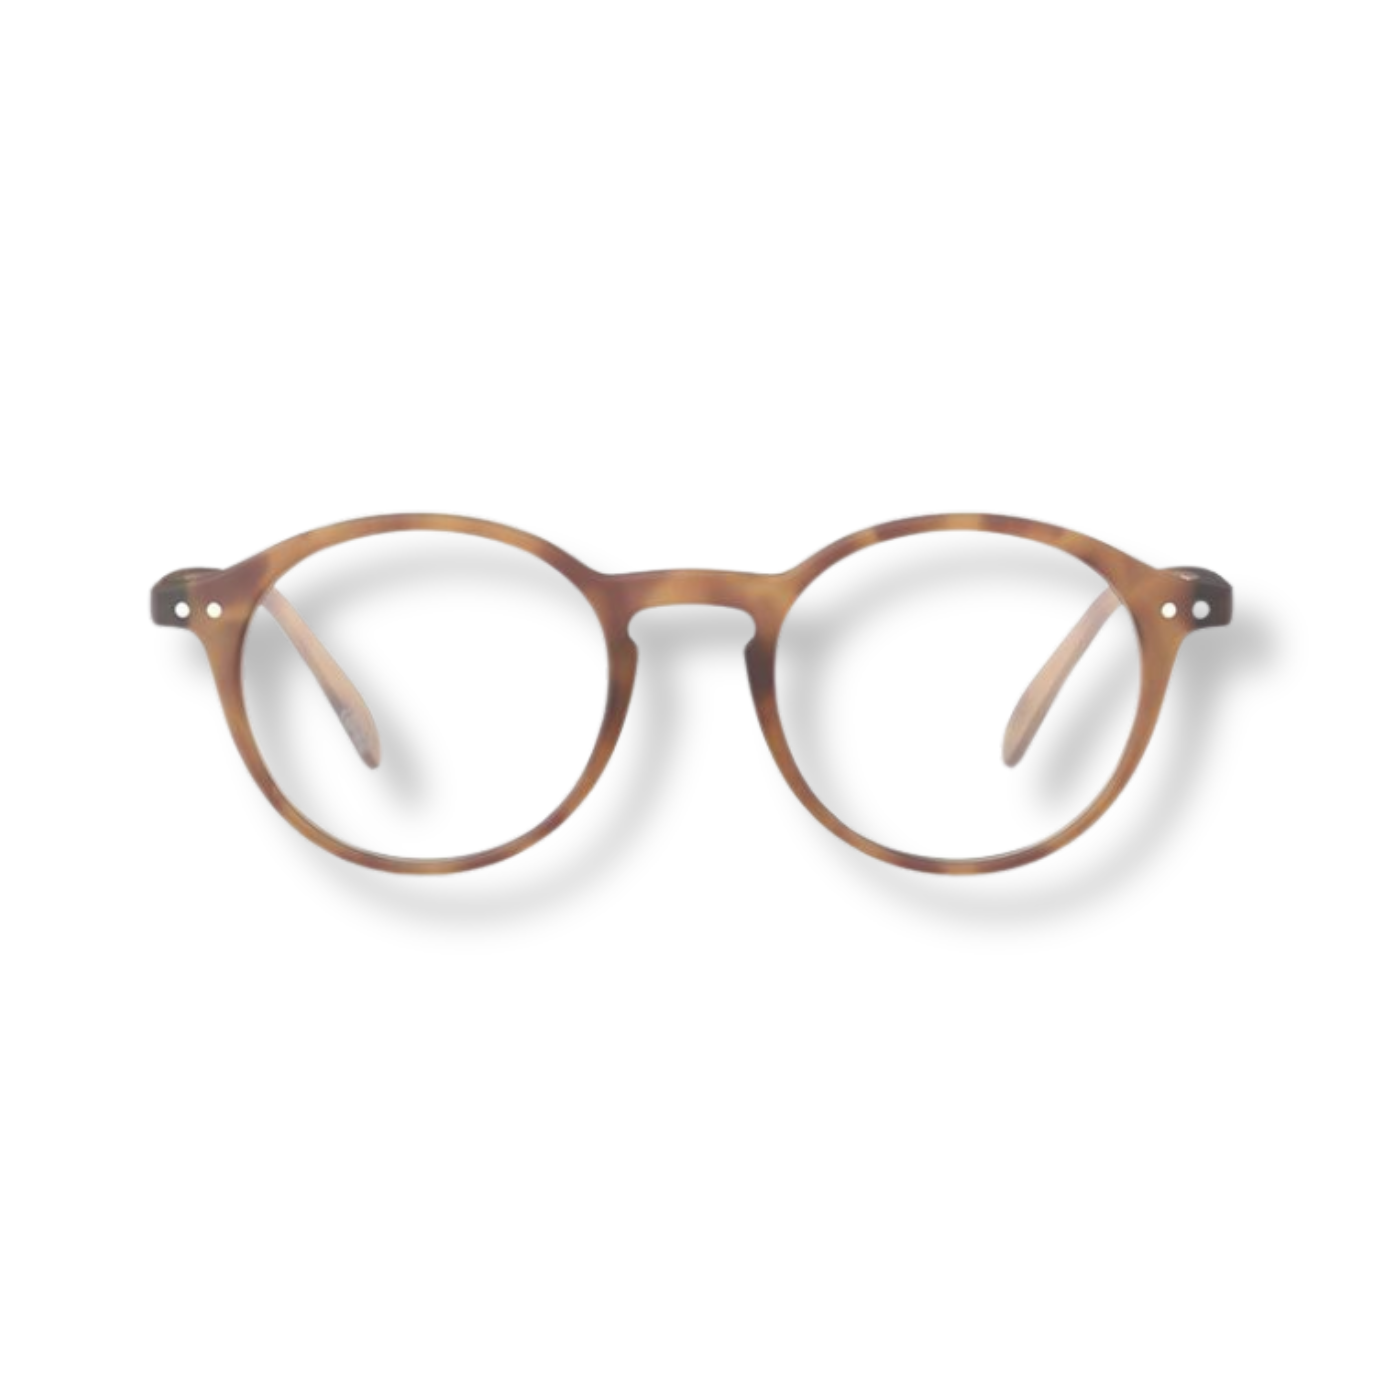 Round reading glasses with a brown frame.